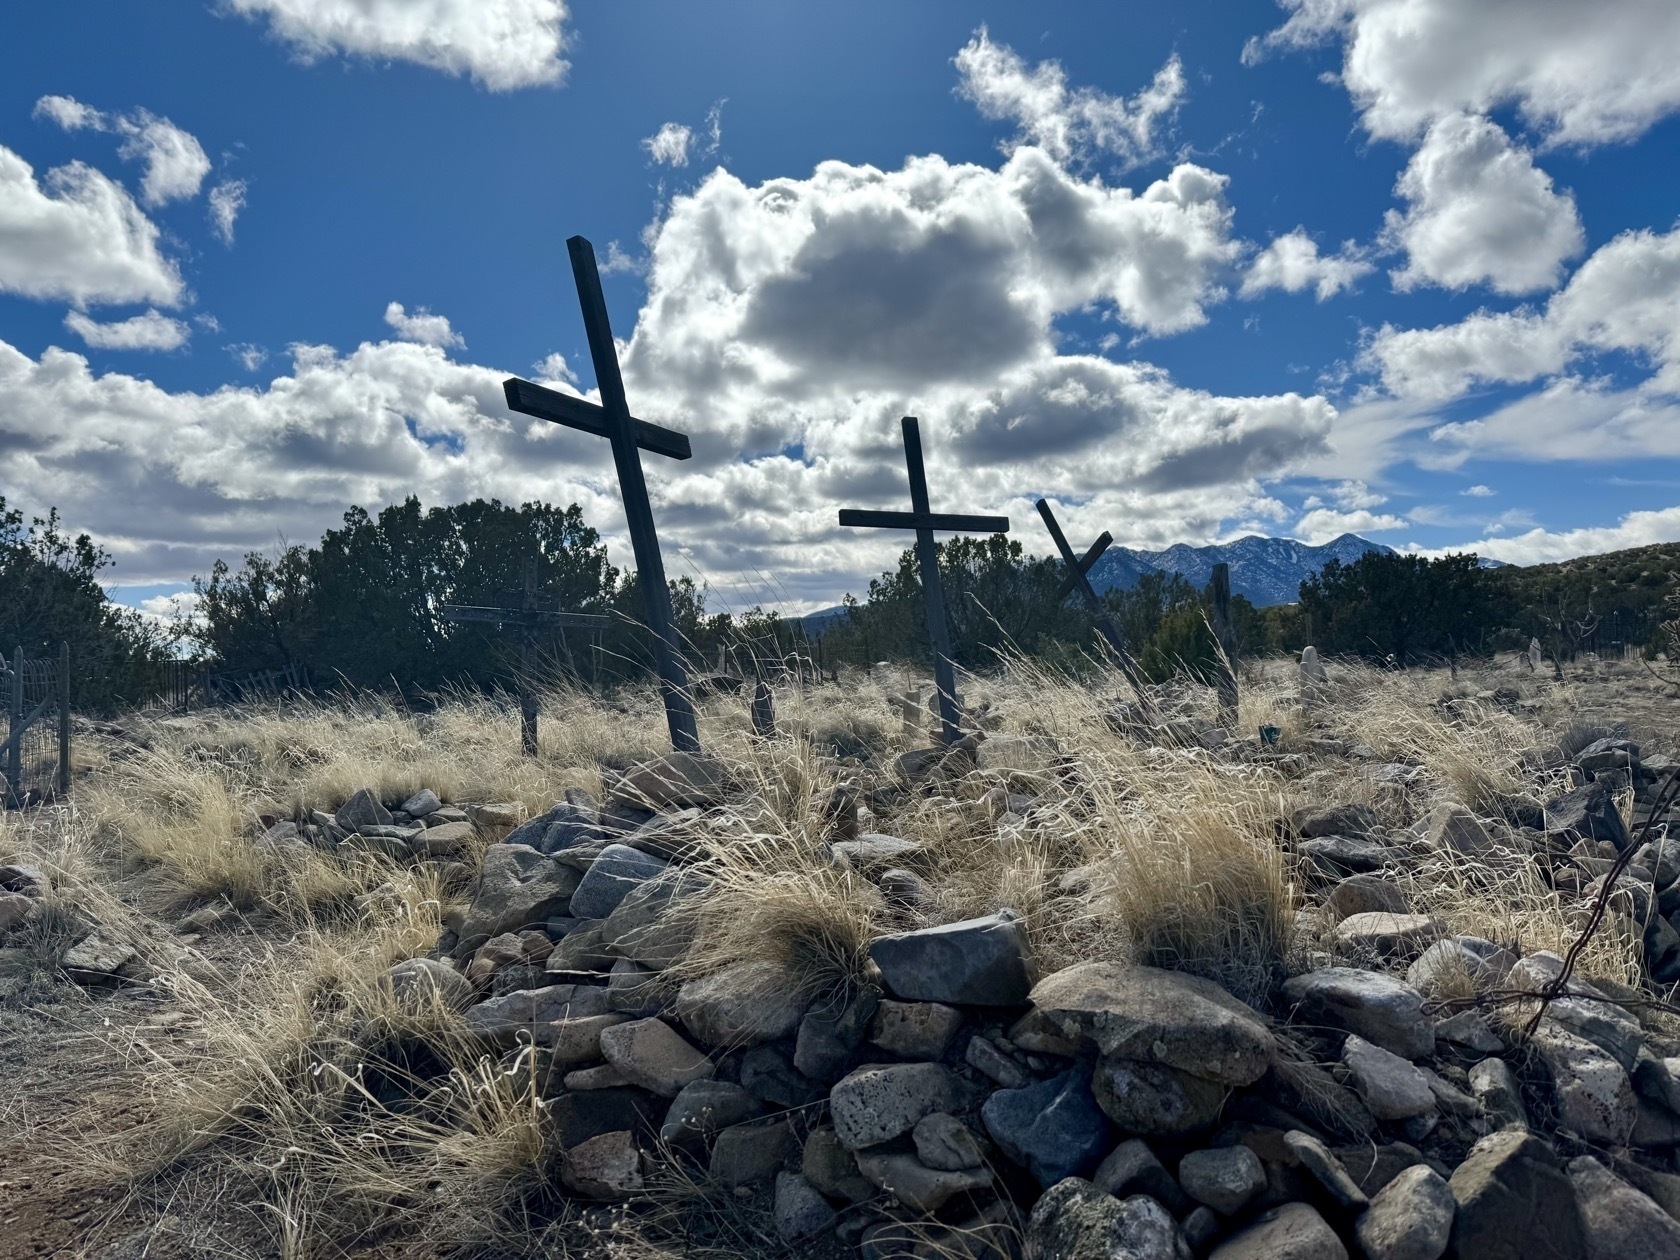 Rocks piled on graves in foreground with wooden crosses slanting and a bright blue sky with white clouds in background